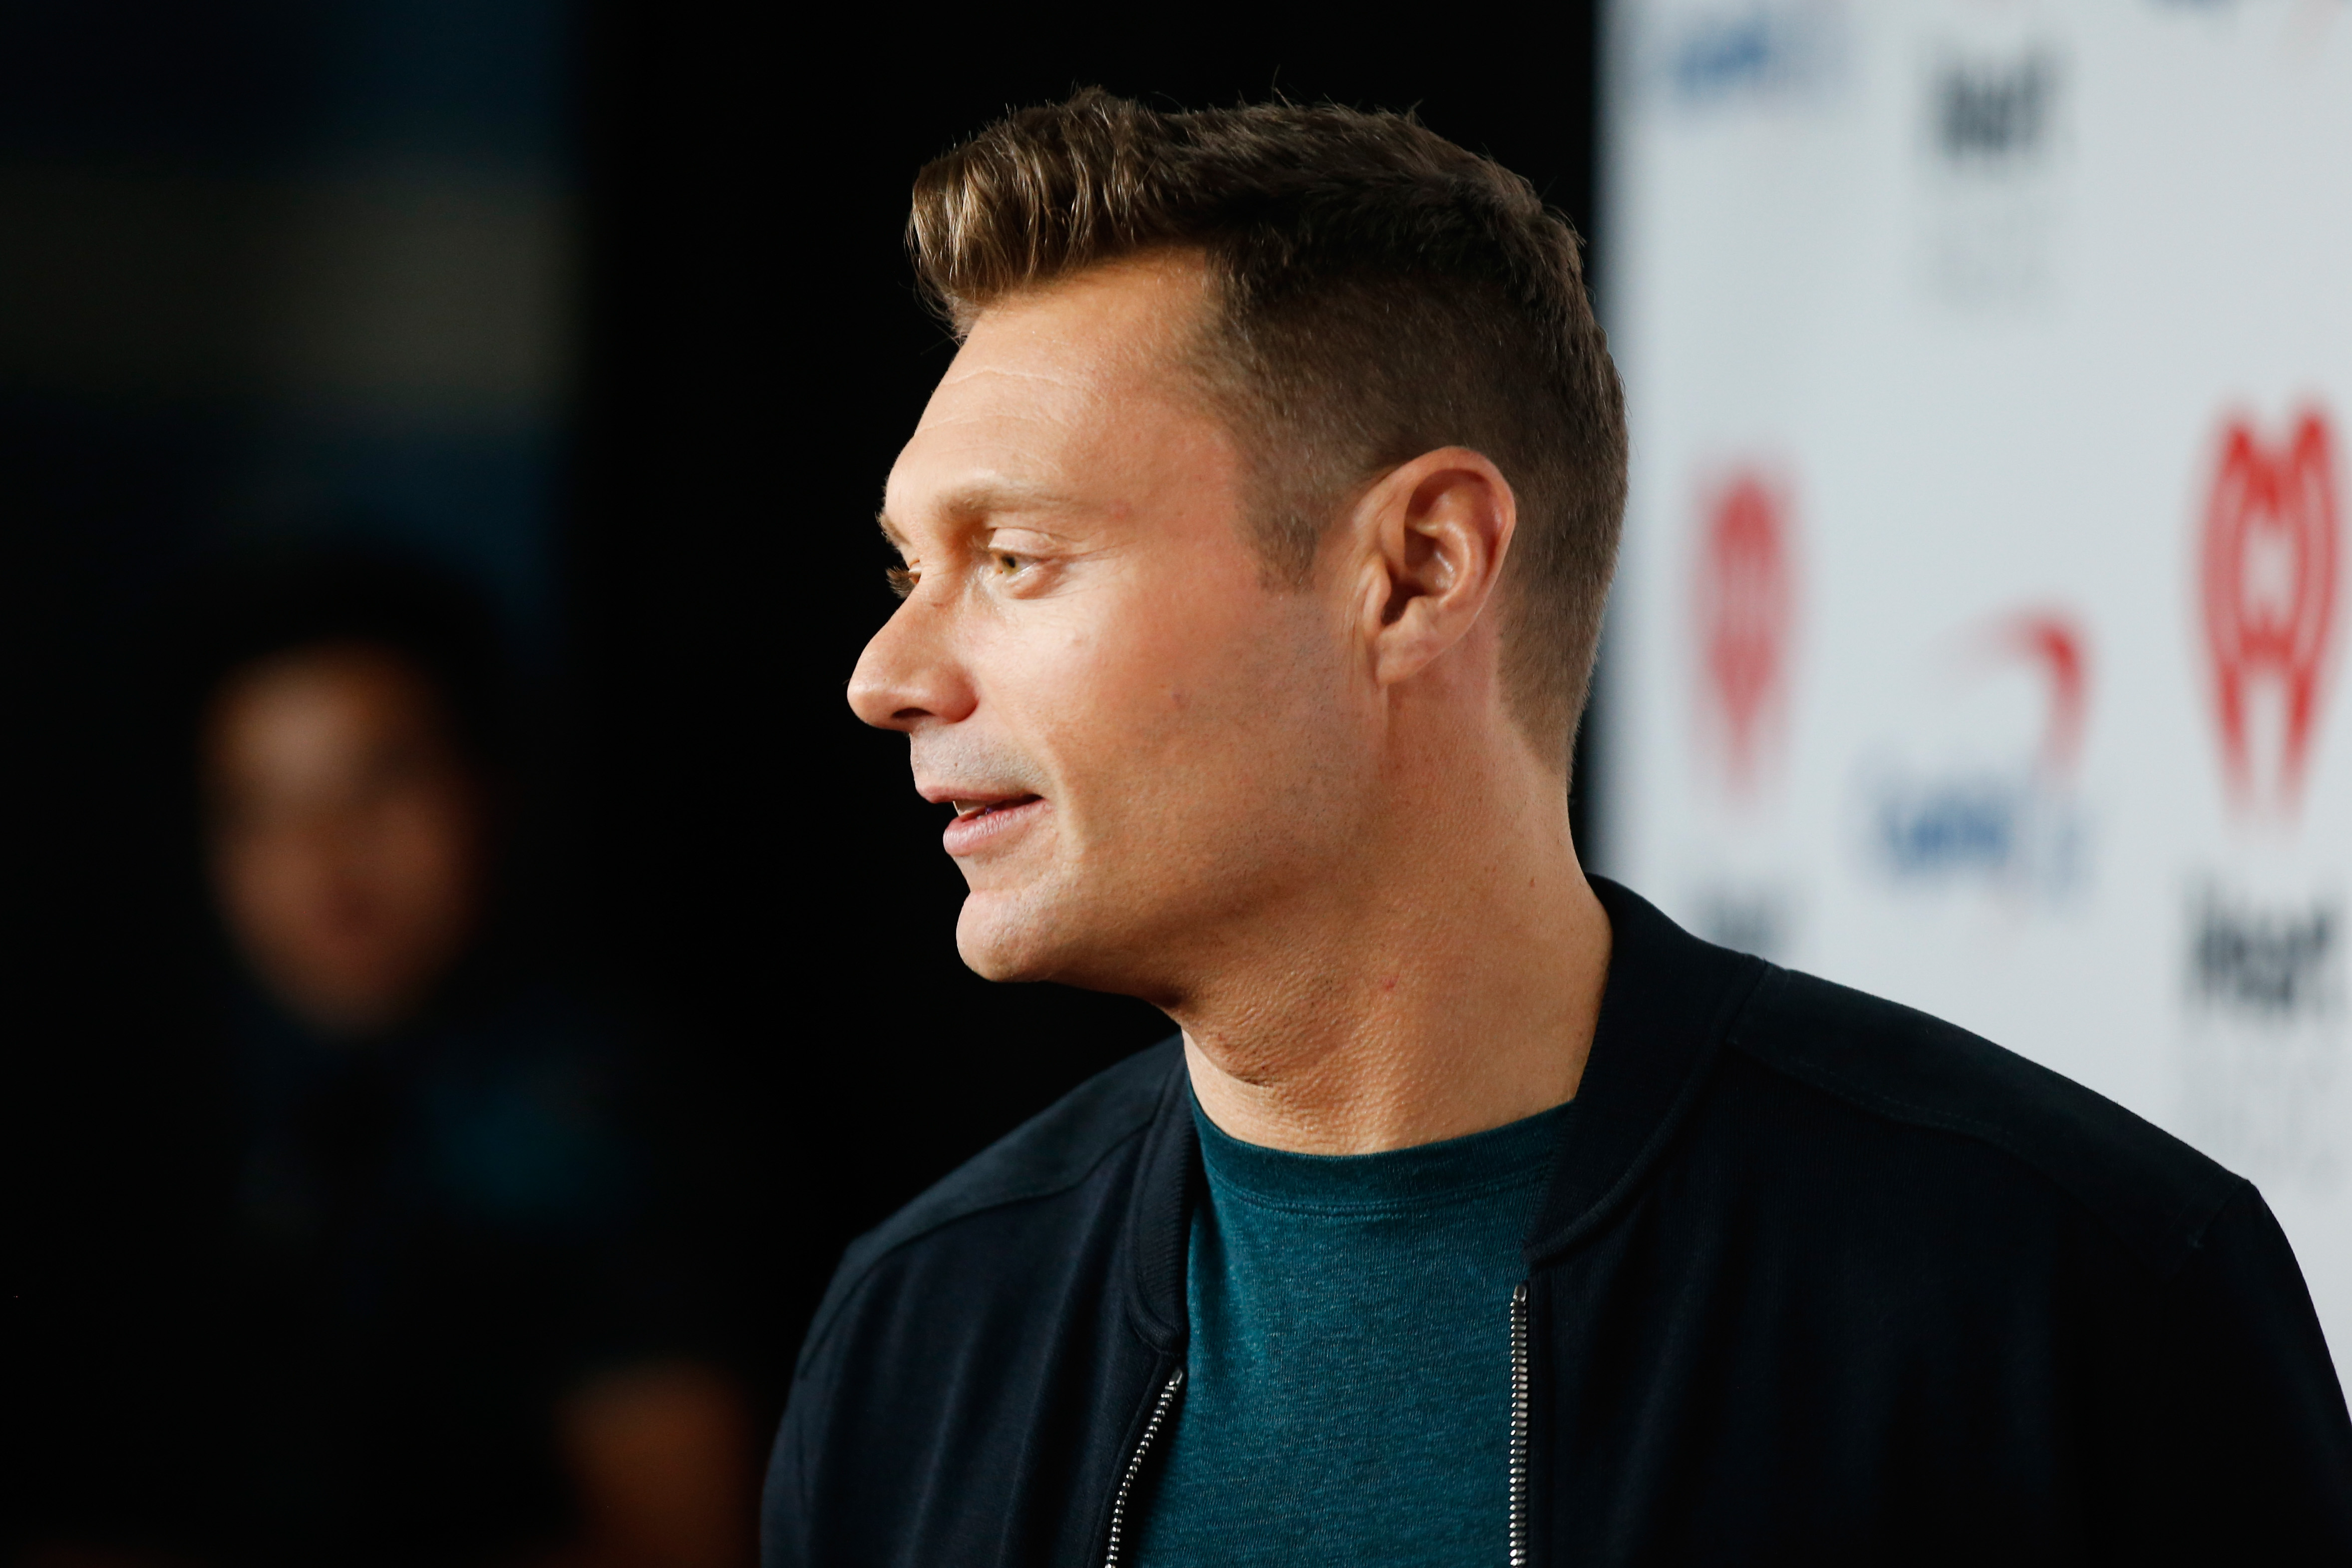 Ryan Seacrest's Sexual Misconduct Allegations Former Stylist Speaks Out